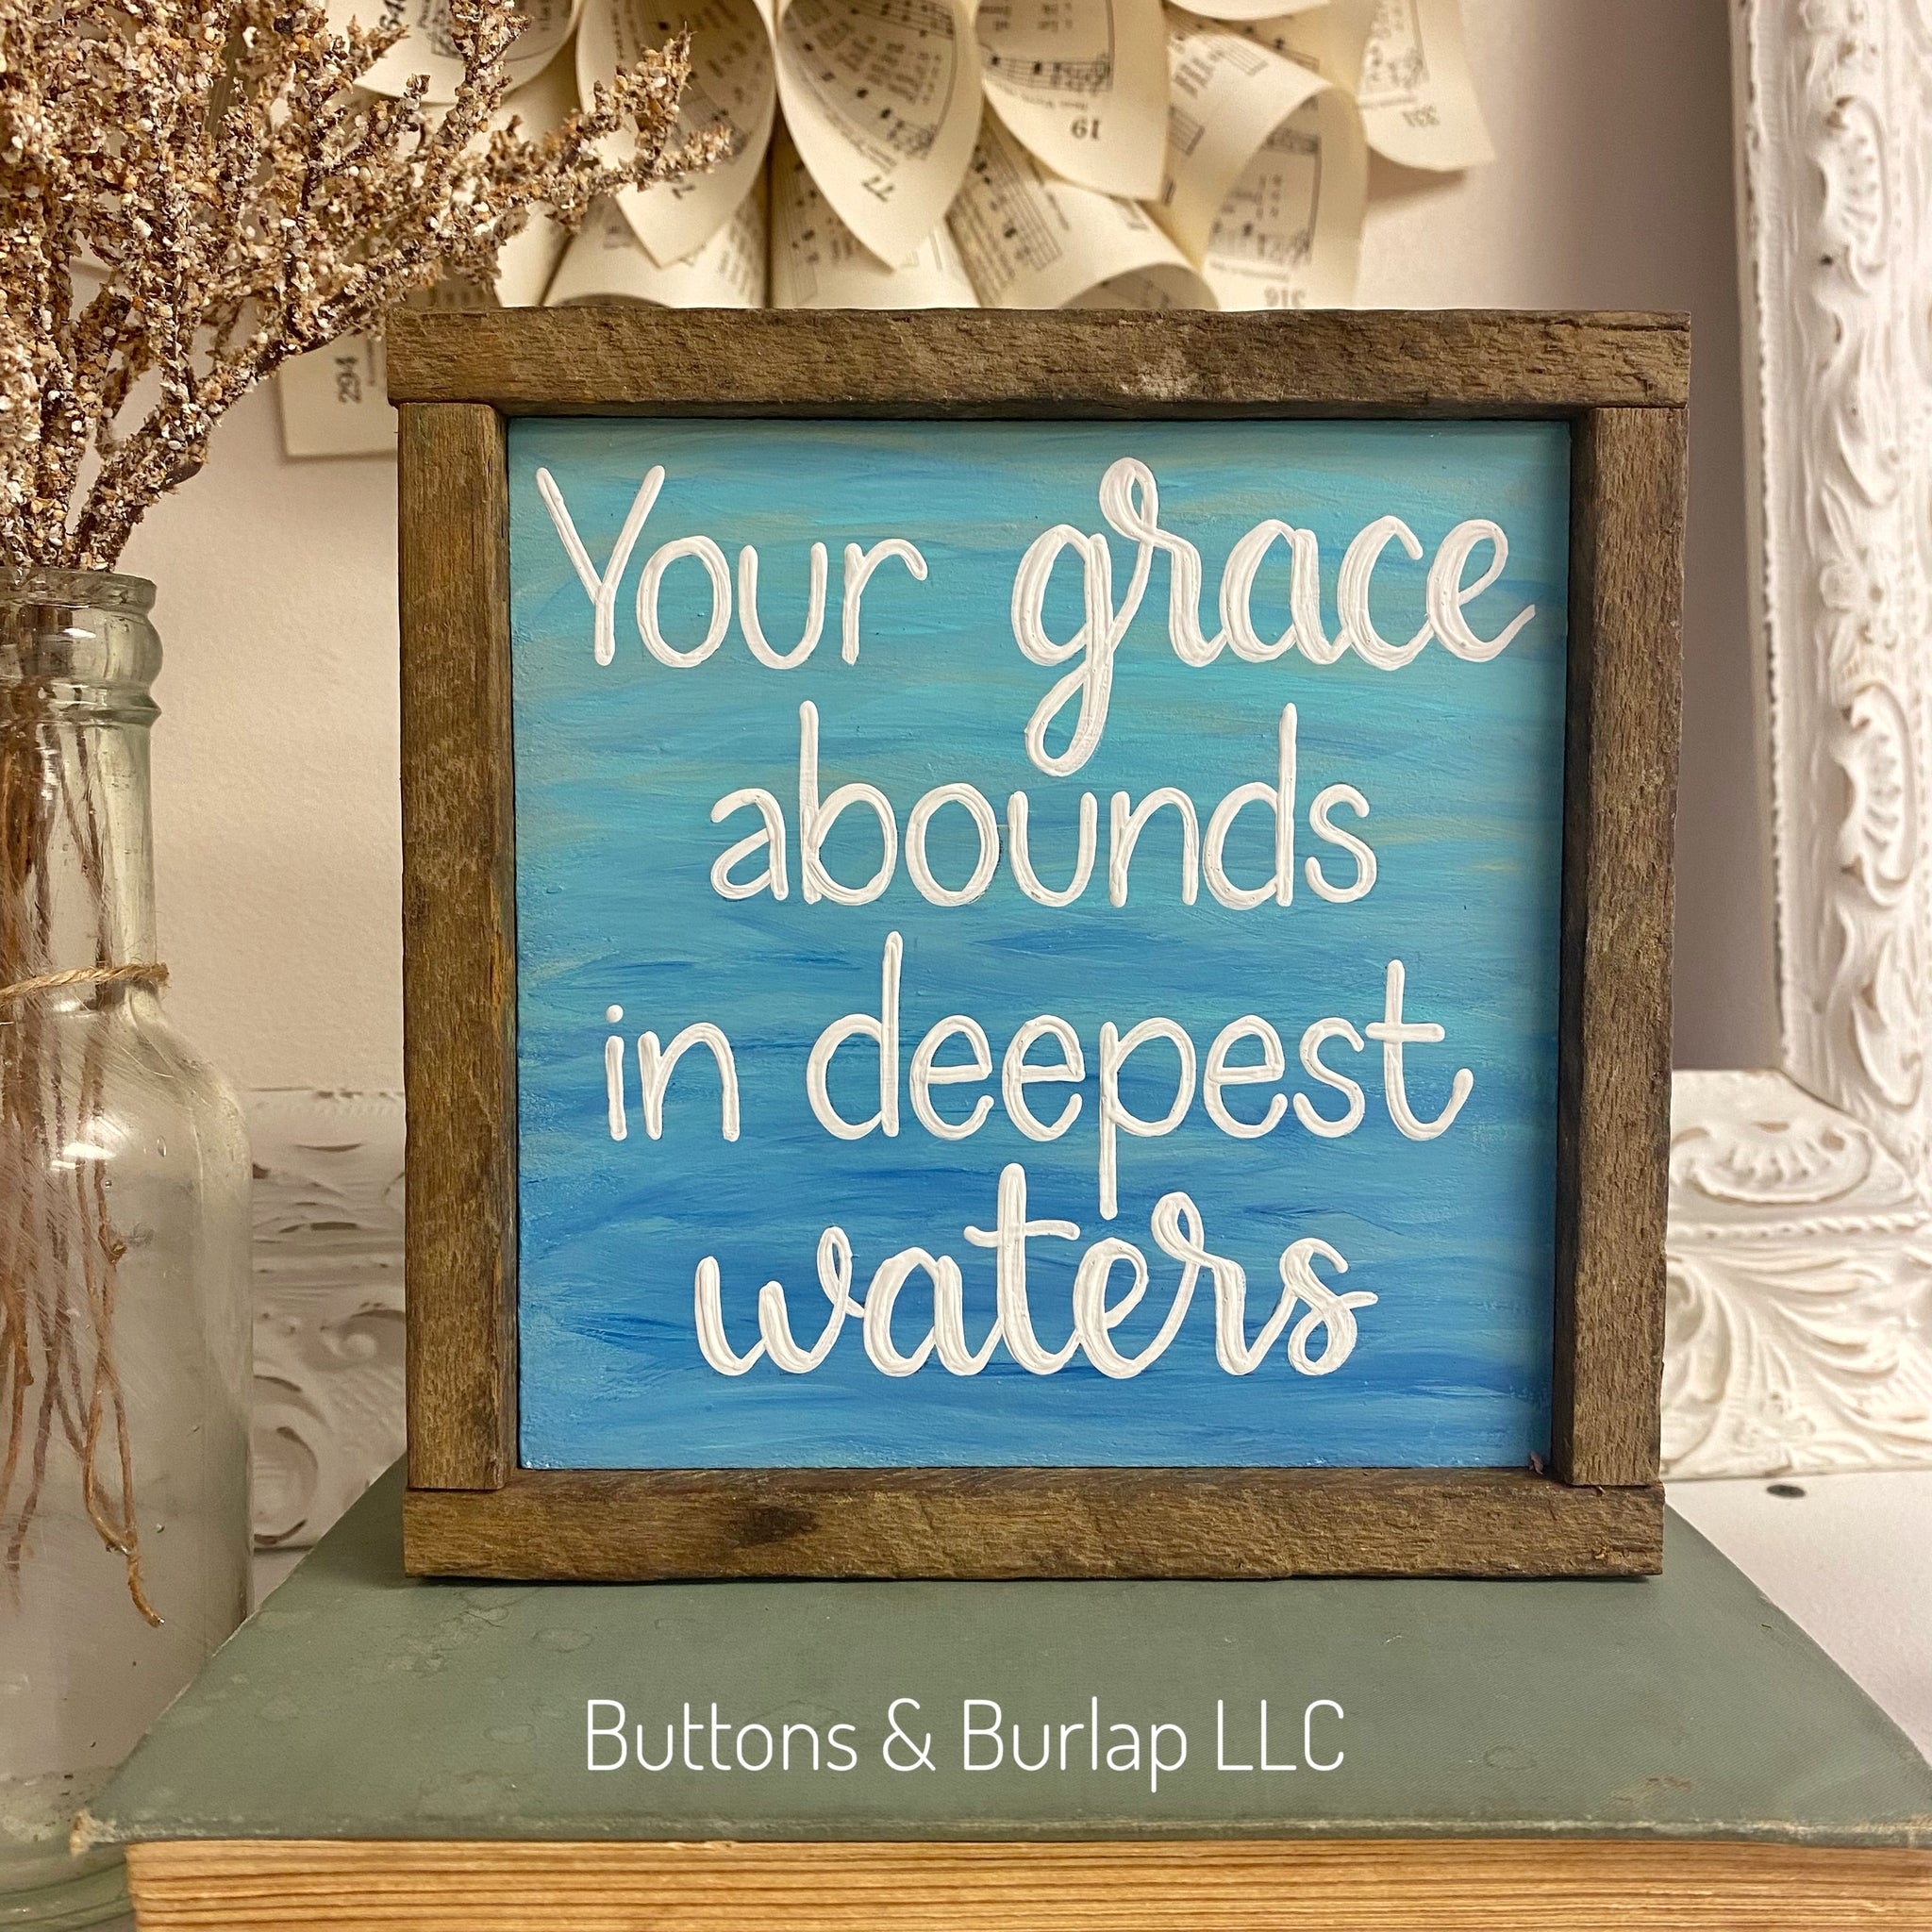 Your grace abounds, water shelf sitter